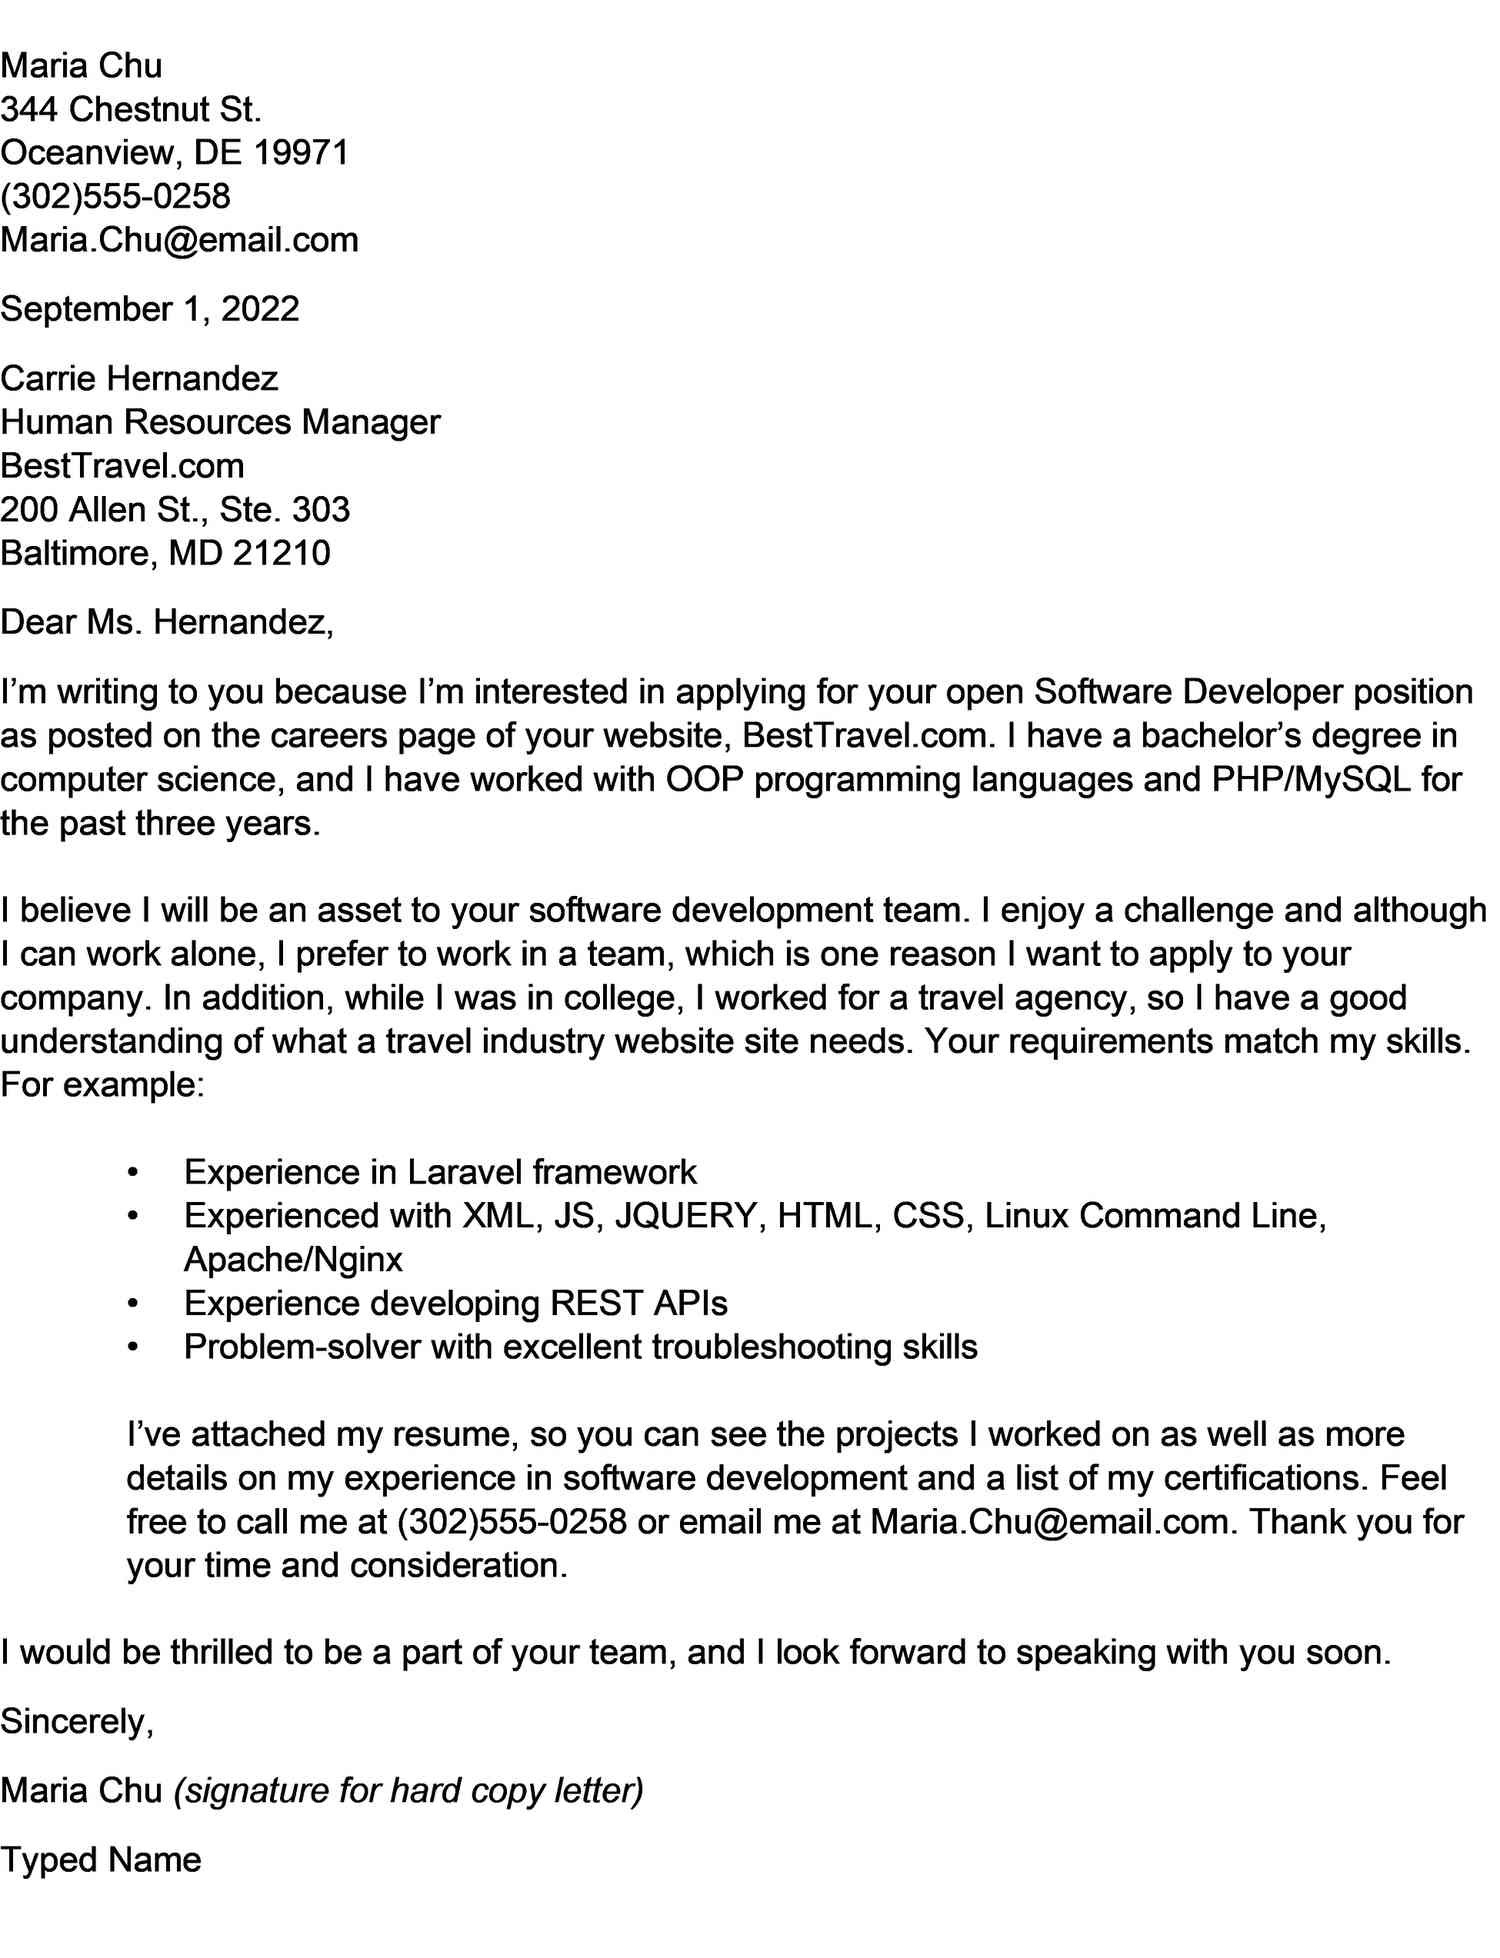 Sample Email with attached Resume and Cover Letter Cover Letter Examples Listed by Type Of Job